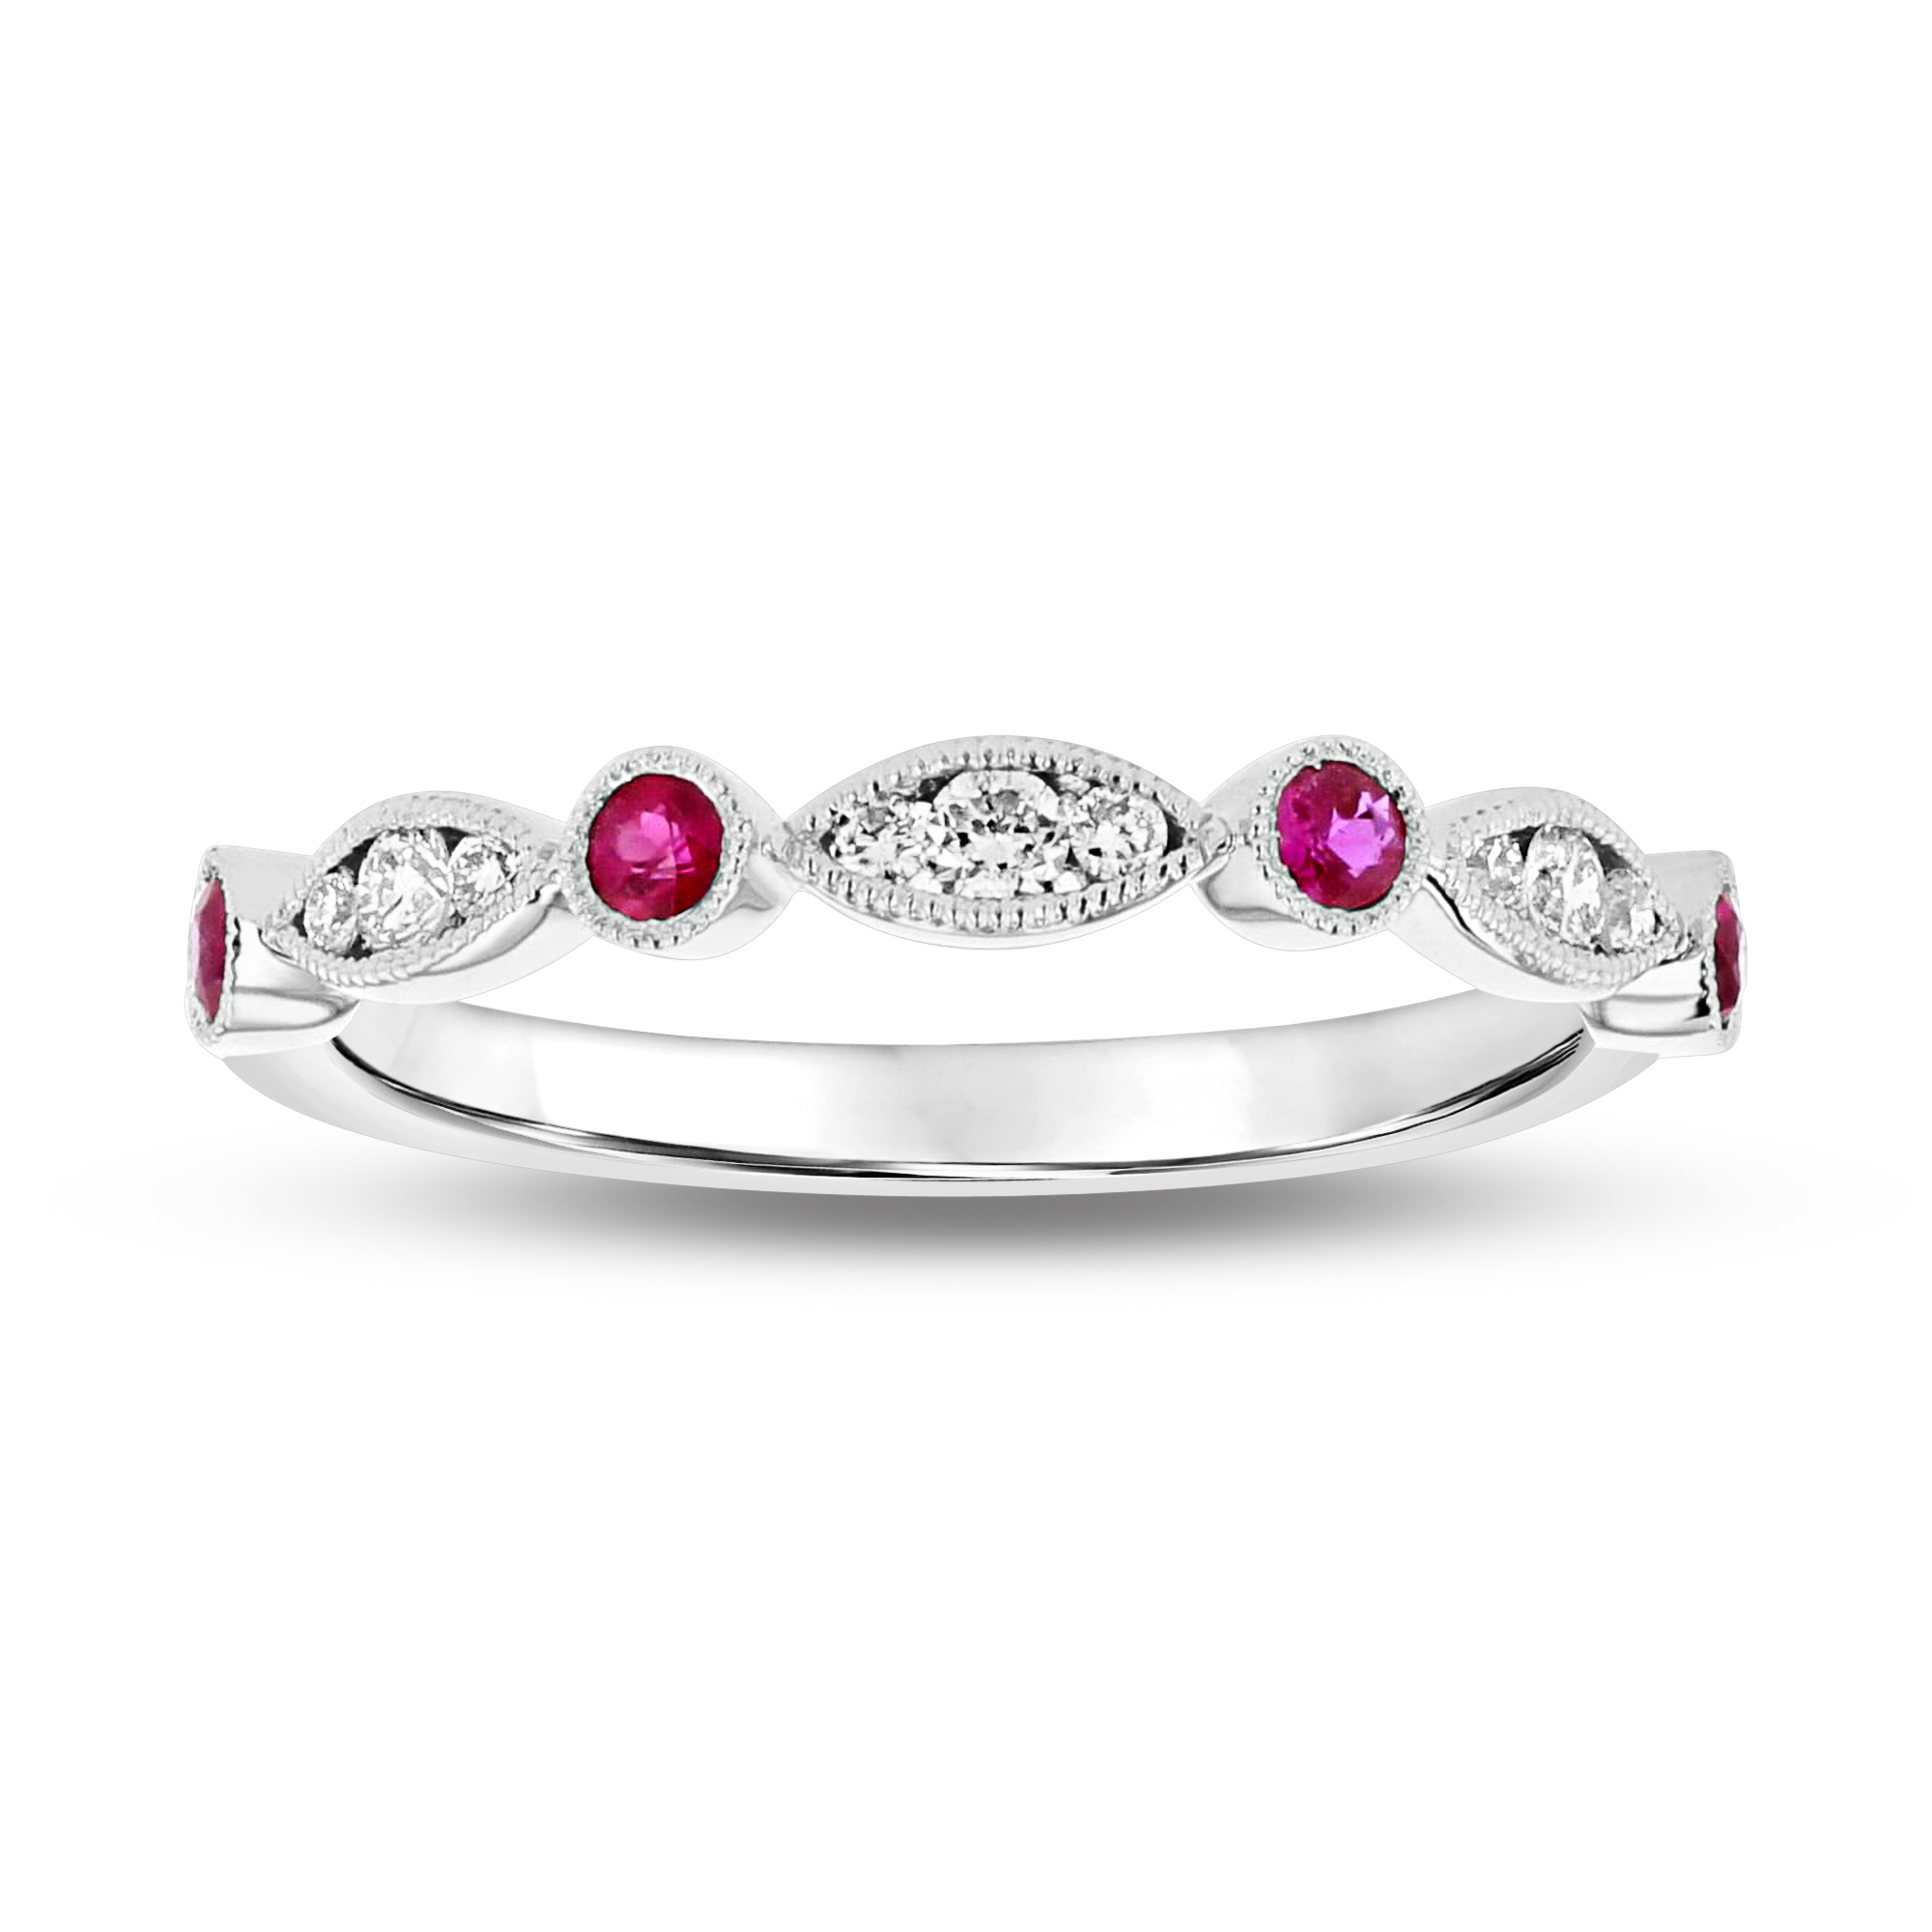 0.16ctw Diamond and Ruby Band in 18k White Gold